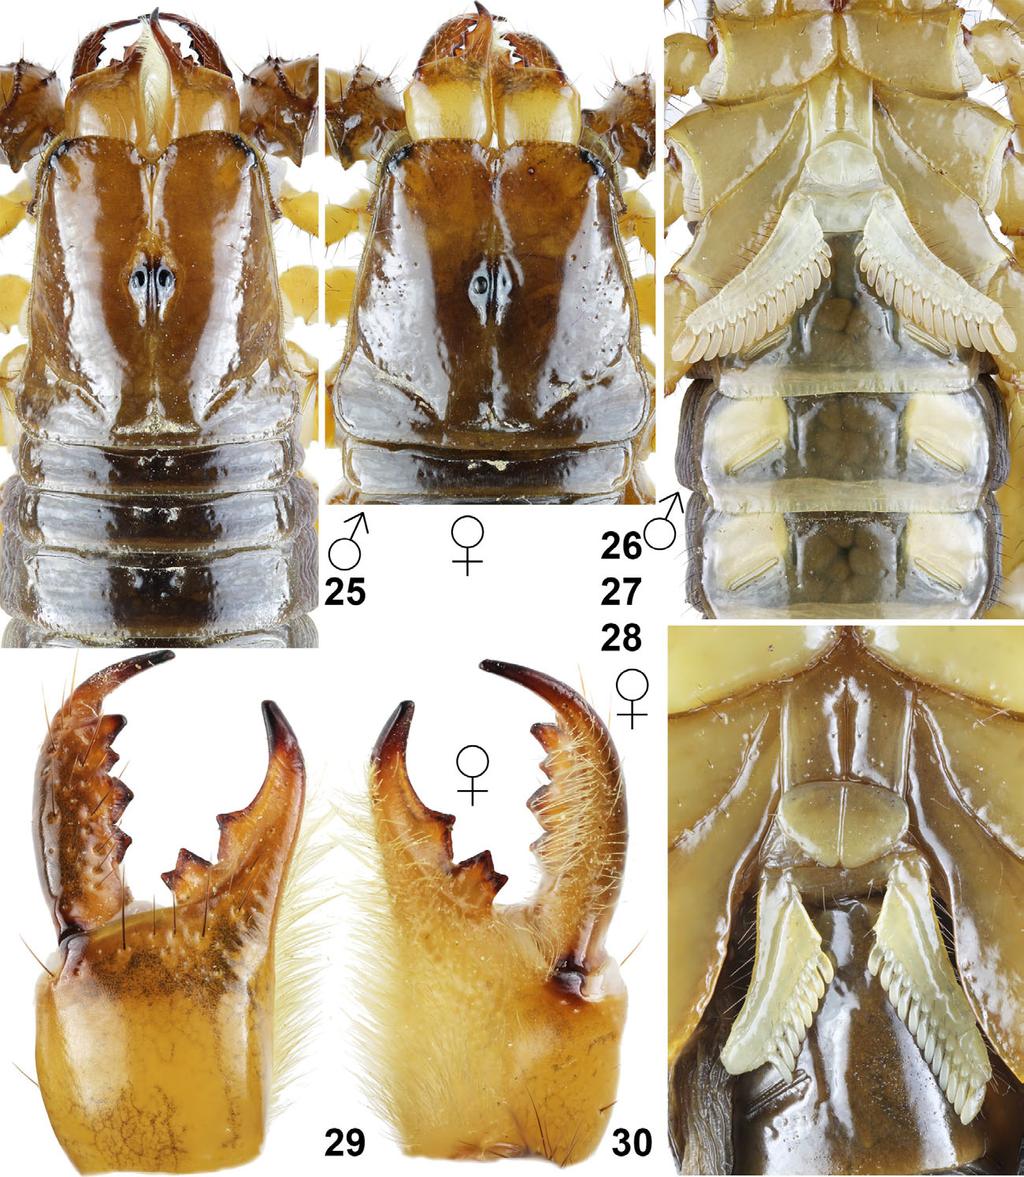 Kovařík et al.: Review of Pandinops 7 Figures 25 30: Pandinops pugilator from locality No. 17SR. Figures 25, 27. Male, carapace and tergites I III (25) and coxosternal area and sternites III V (27).